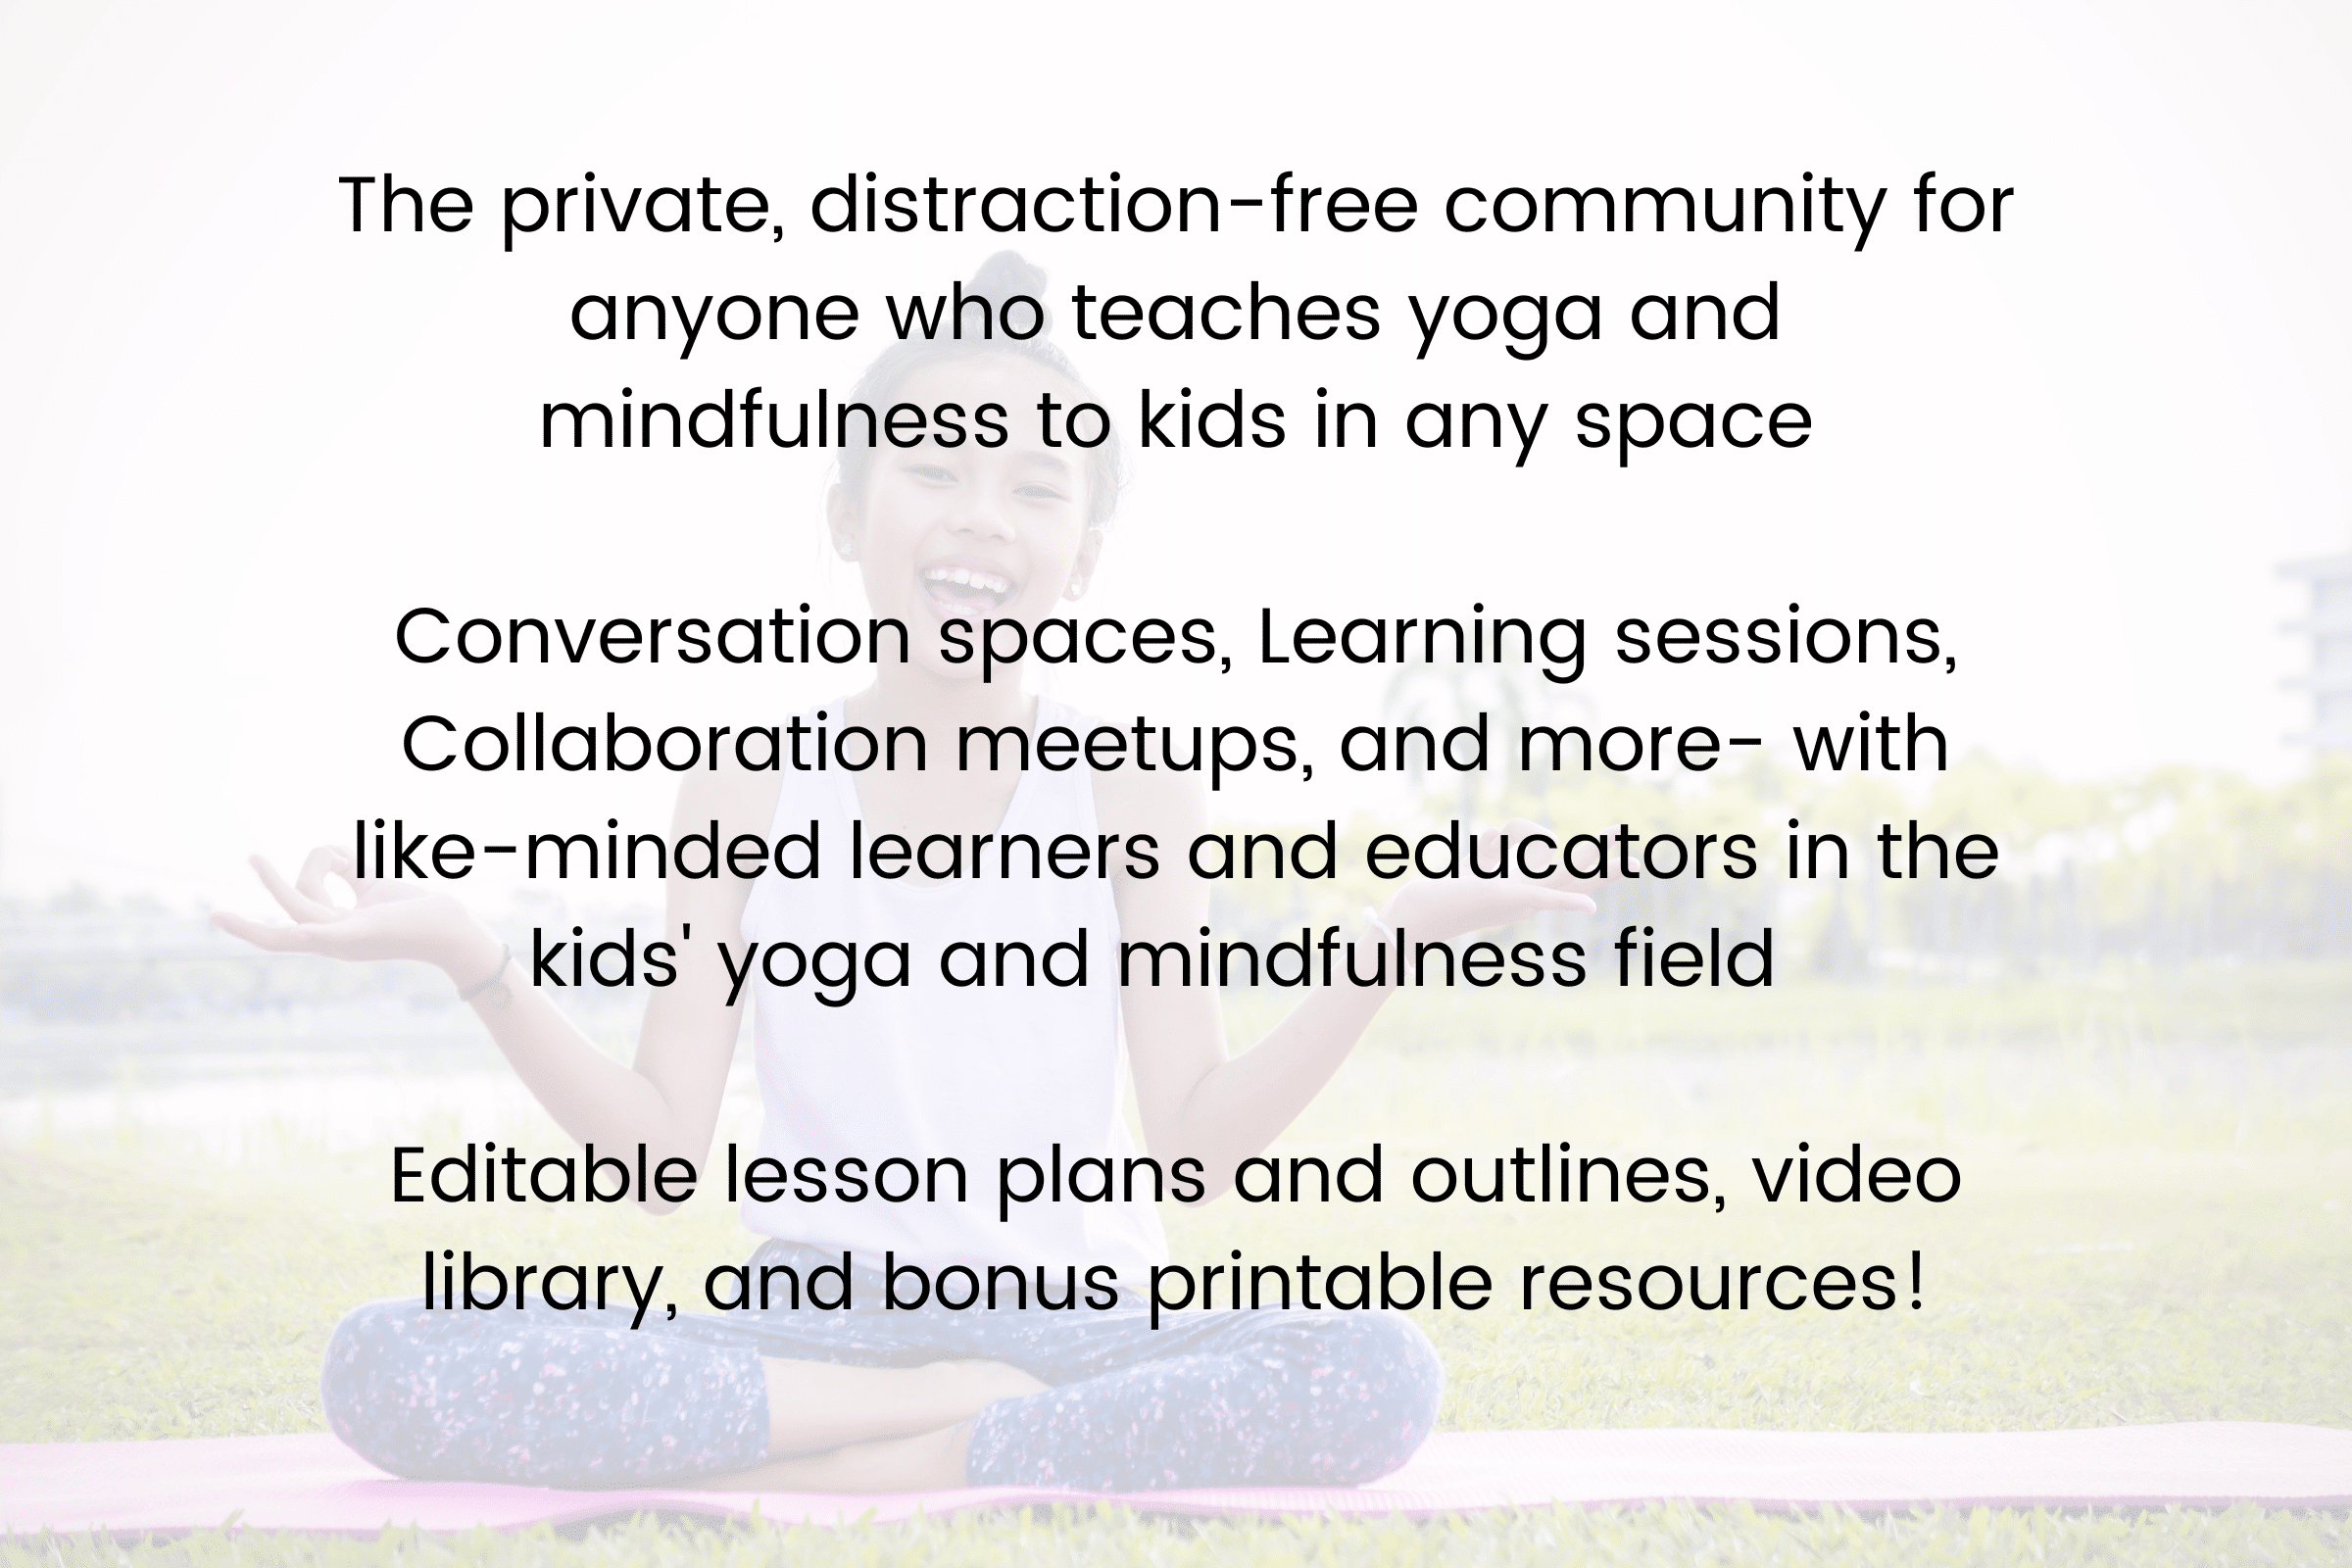 Do you feel like you need to connect with other kids' yoga teachers and educators to share stories and get specific advice on your classes?

Are you ready to enhance your kids' yoga and mindfulness teaching skills with tips and tricks from other seasoned veterans in the field?

Join the Kids' yoga learning community - empowered educators